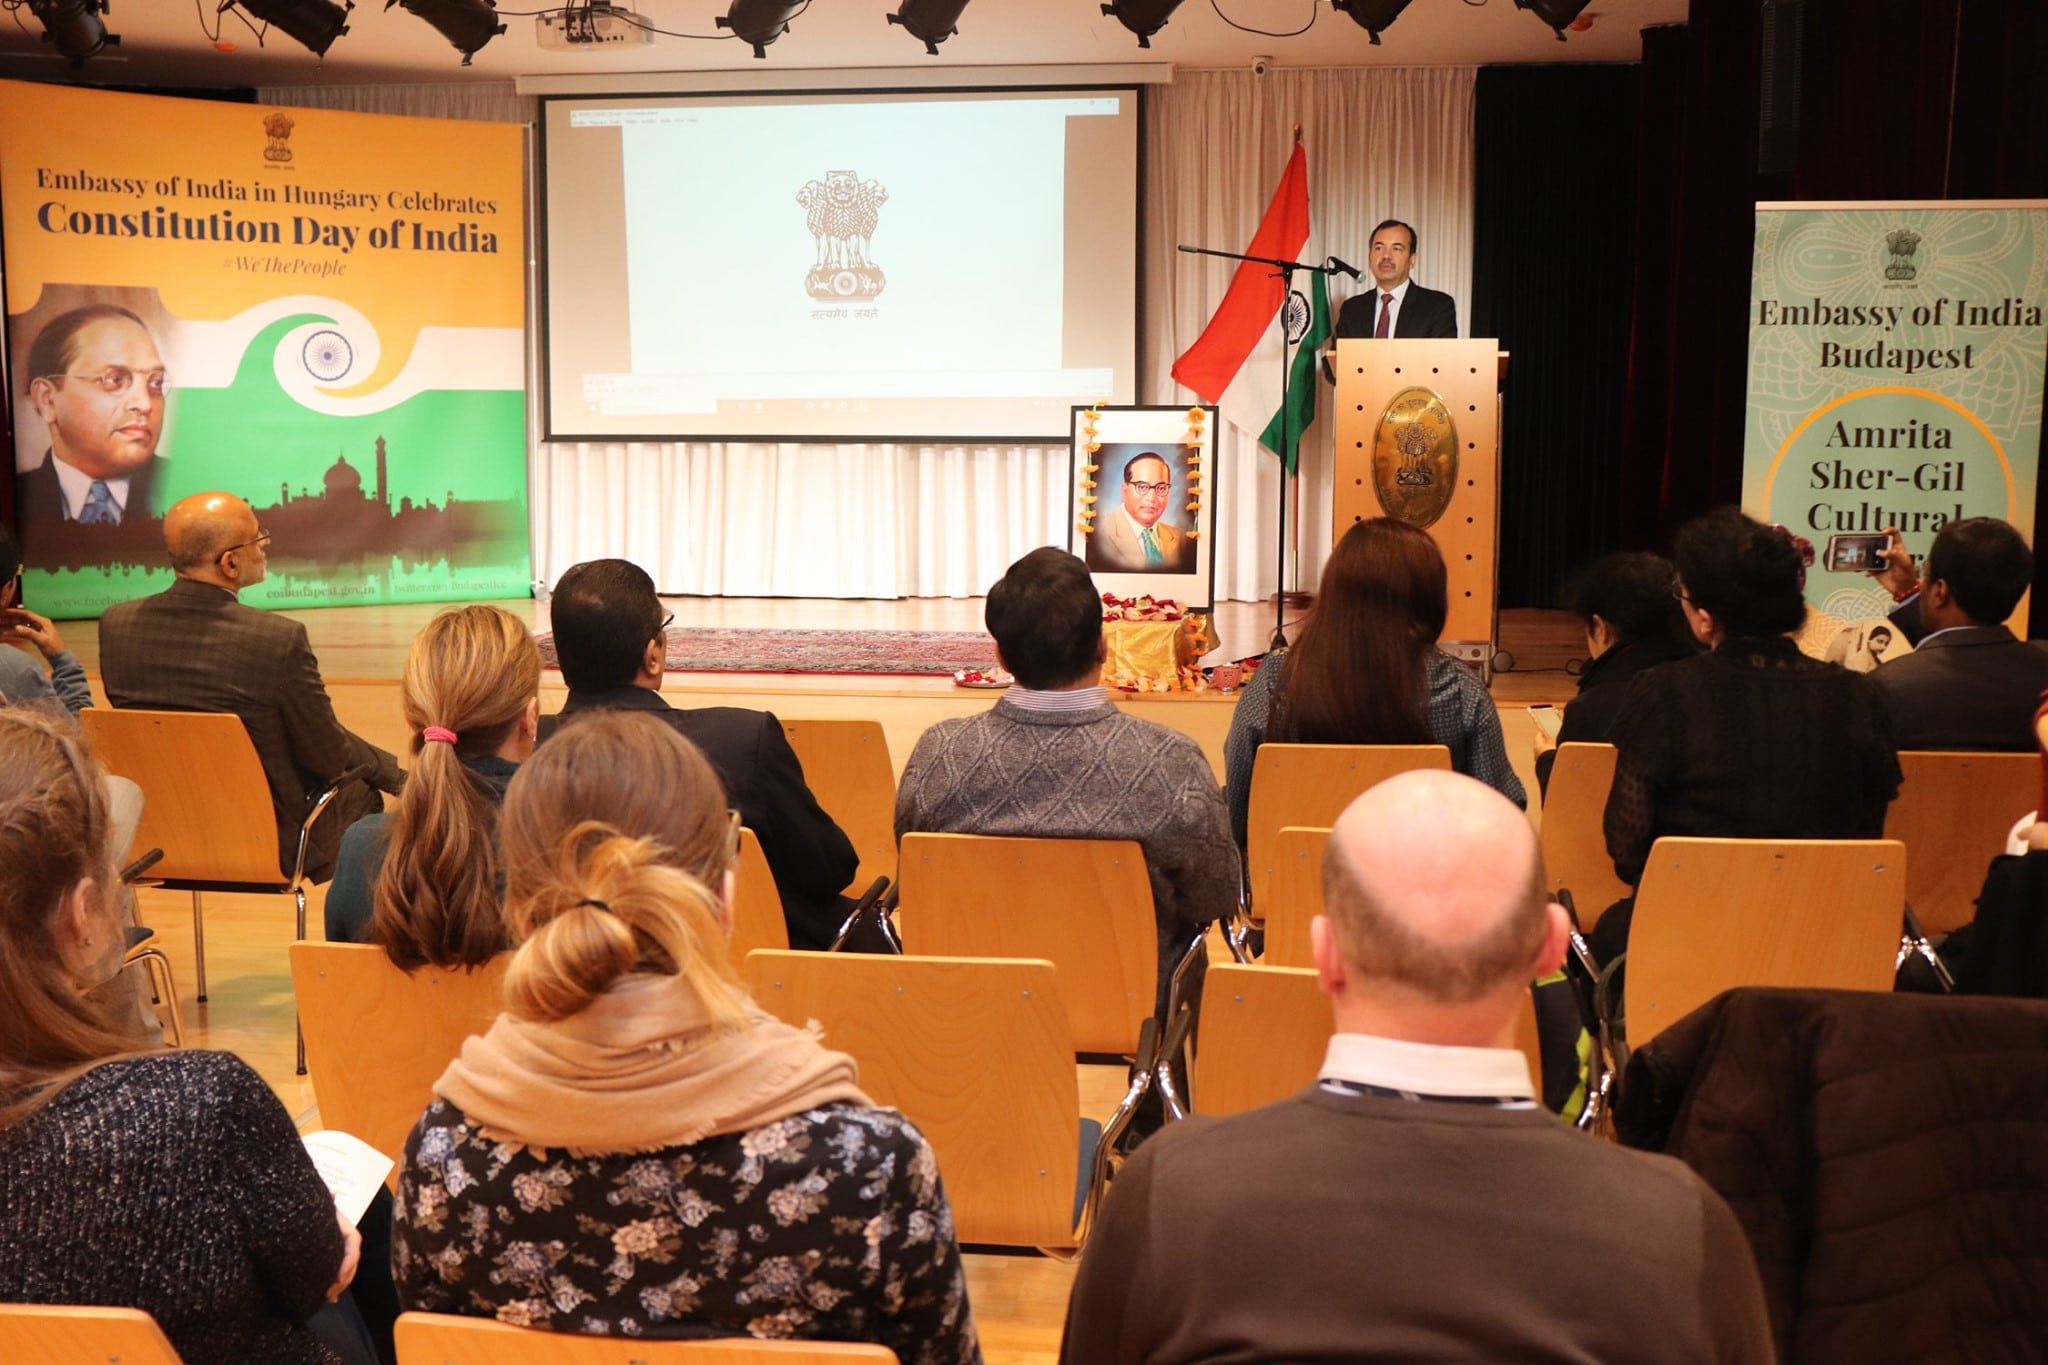 Embassy Of India celebrated the 70th Constitution Day Of India Budapest